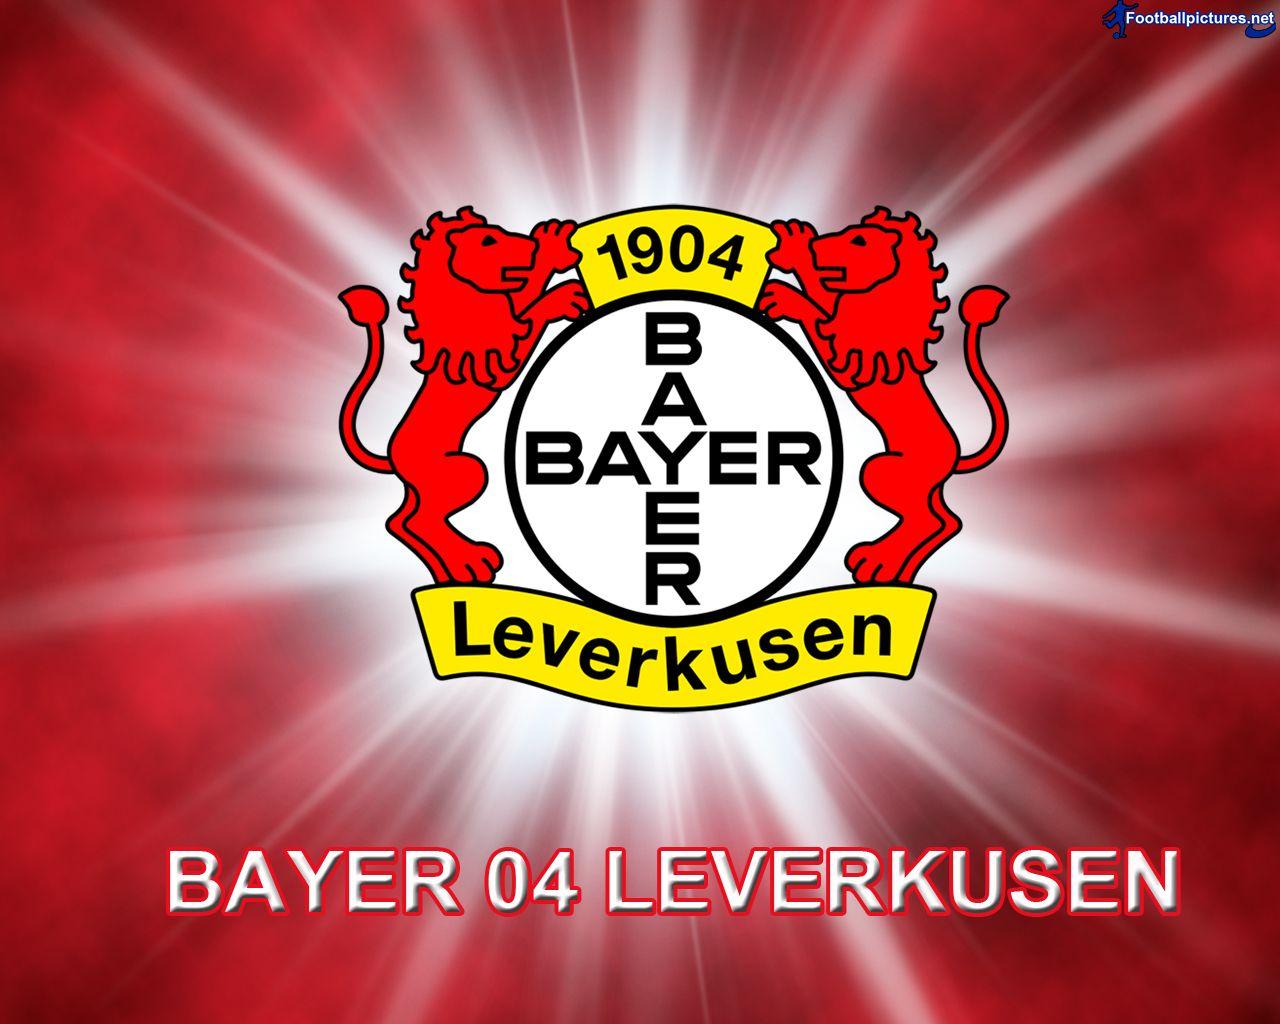 bayer leverkusen 2012 1280x1024 wallpaper, Football Picture and Photo